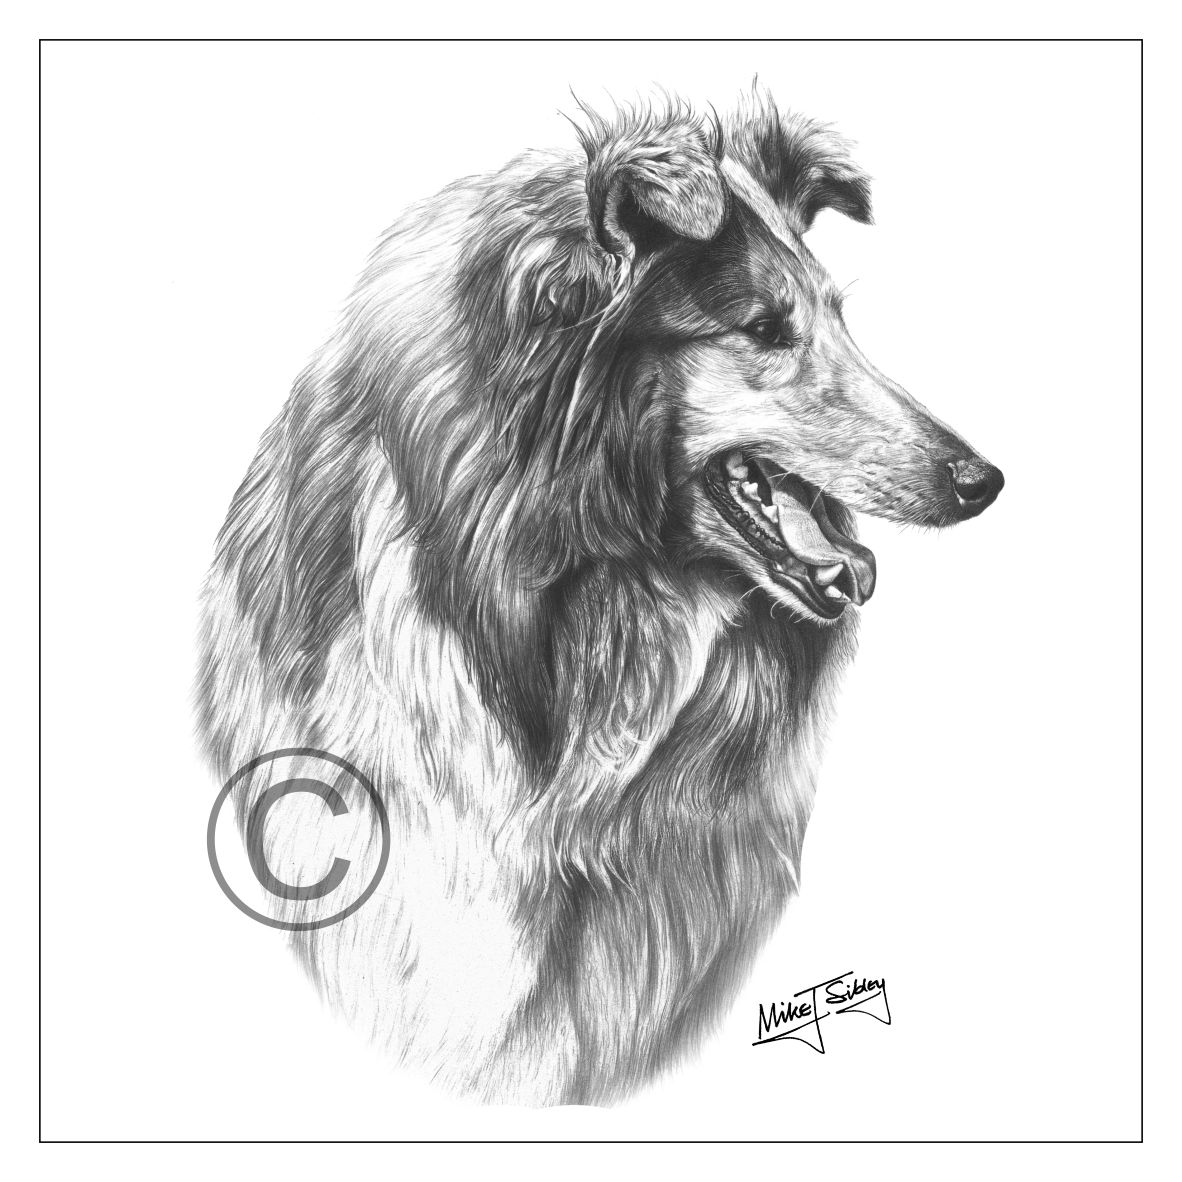 Mike Sibley Design Rough Collie Greeting Card